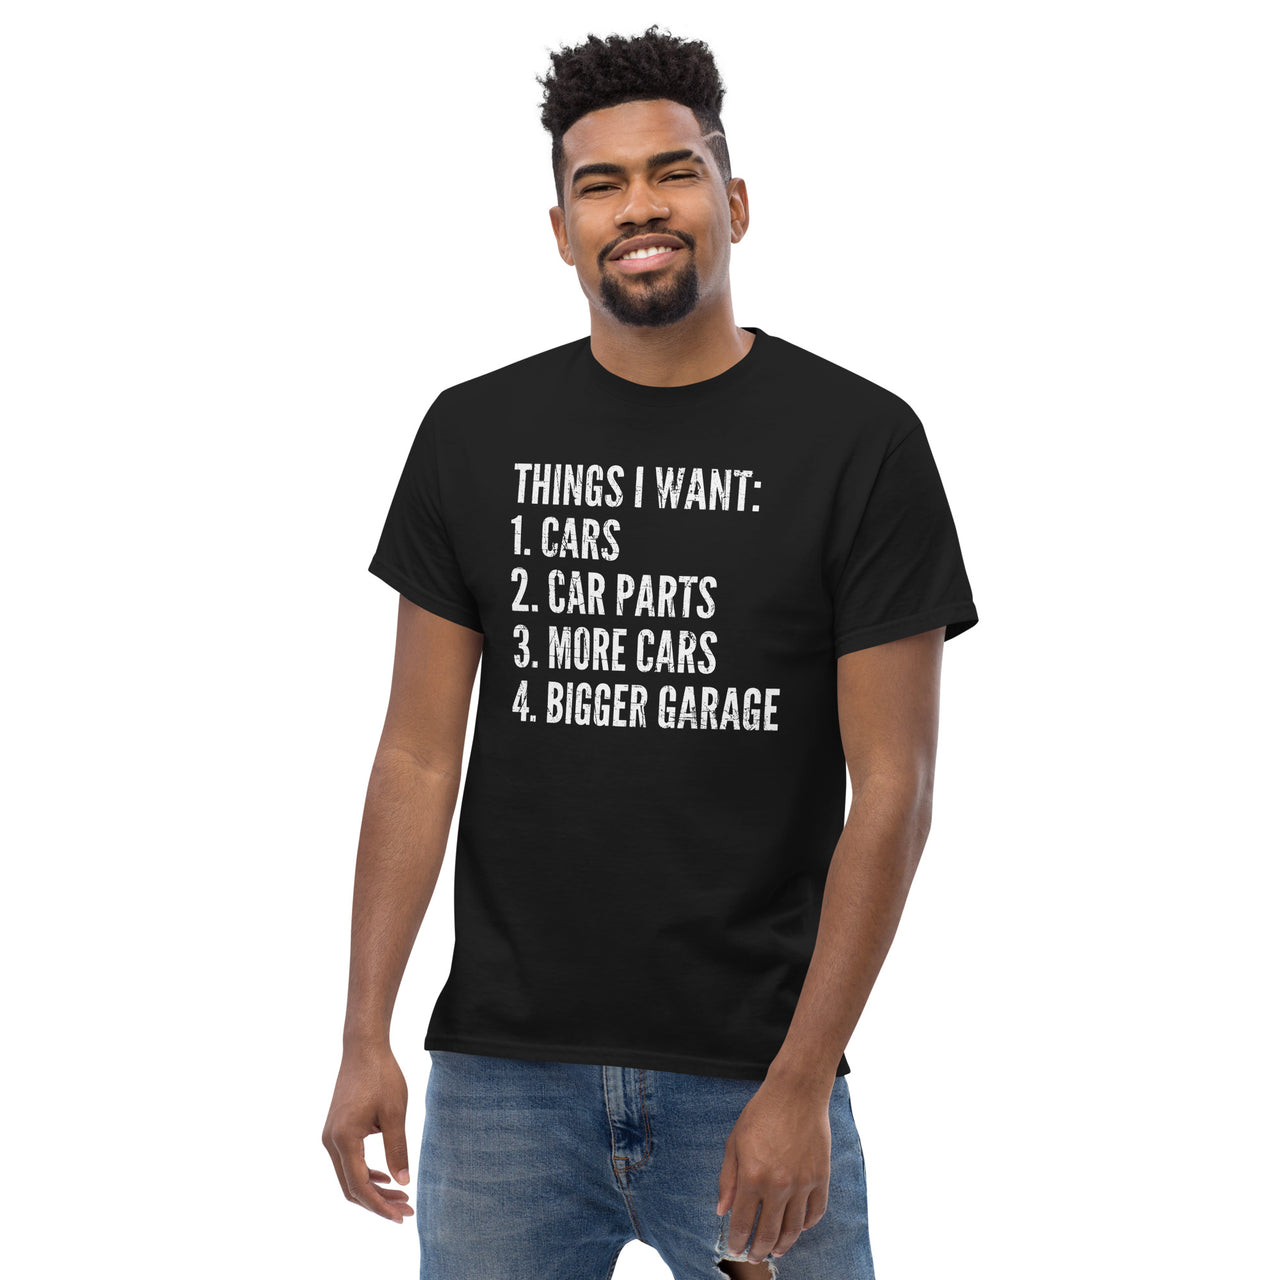 Funny Car Enthusiast T-Shirt Things I Want modeled in black